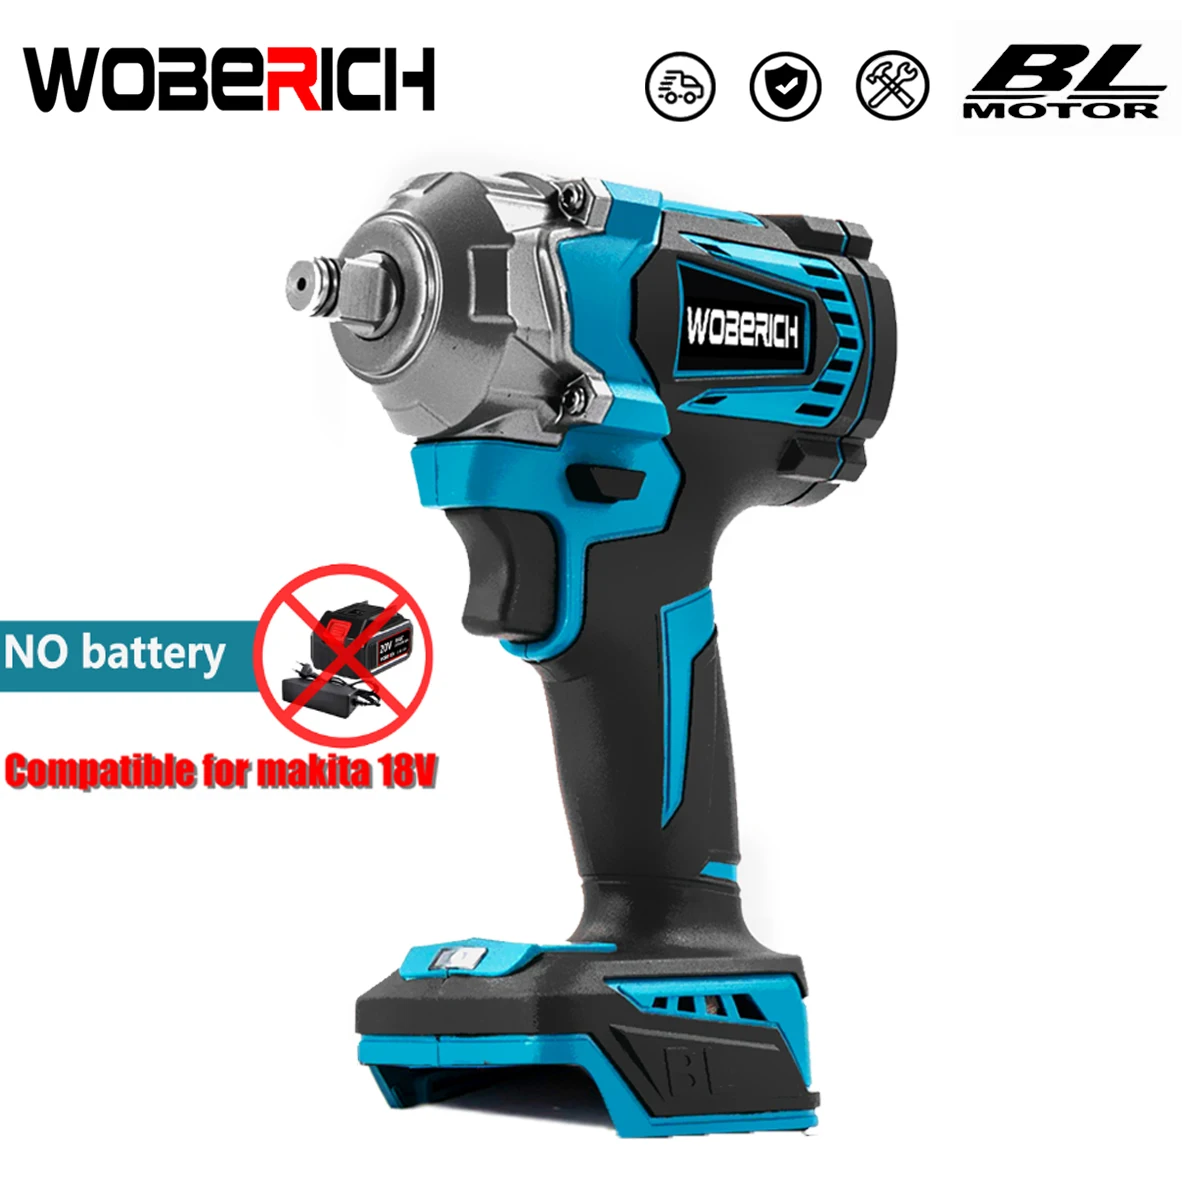 

High Torque 1200N.m Brushless Electric Impact Wrench 1/2 inch Socket Wrench Cordless Driver Tool (No battery) for Makita 18V